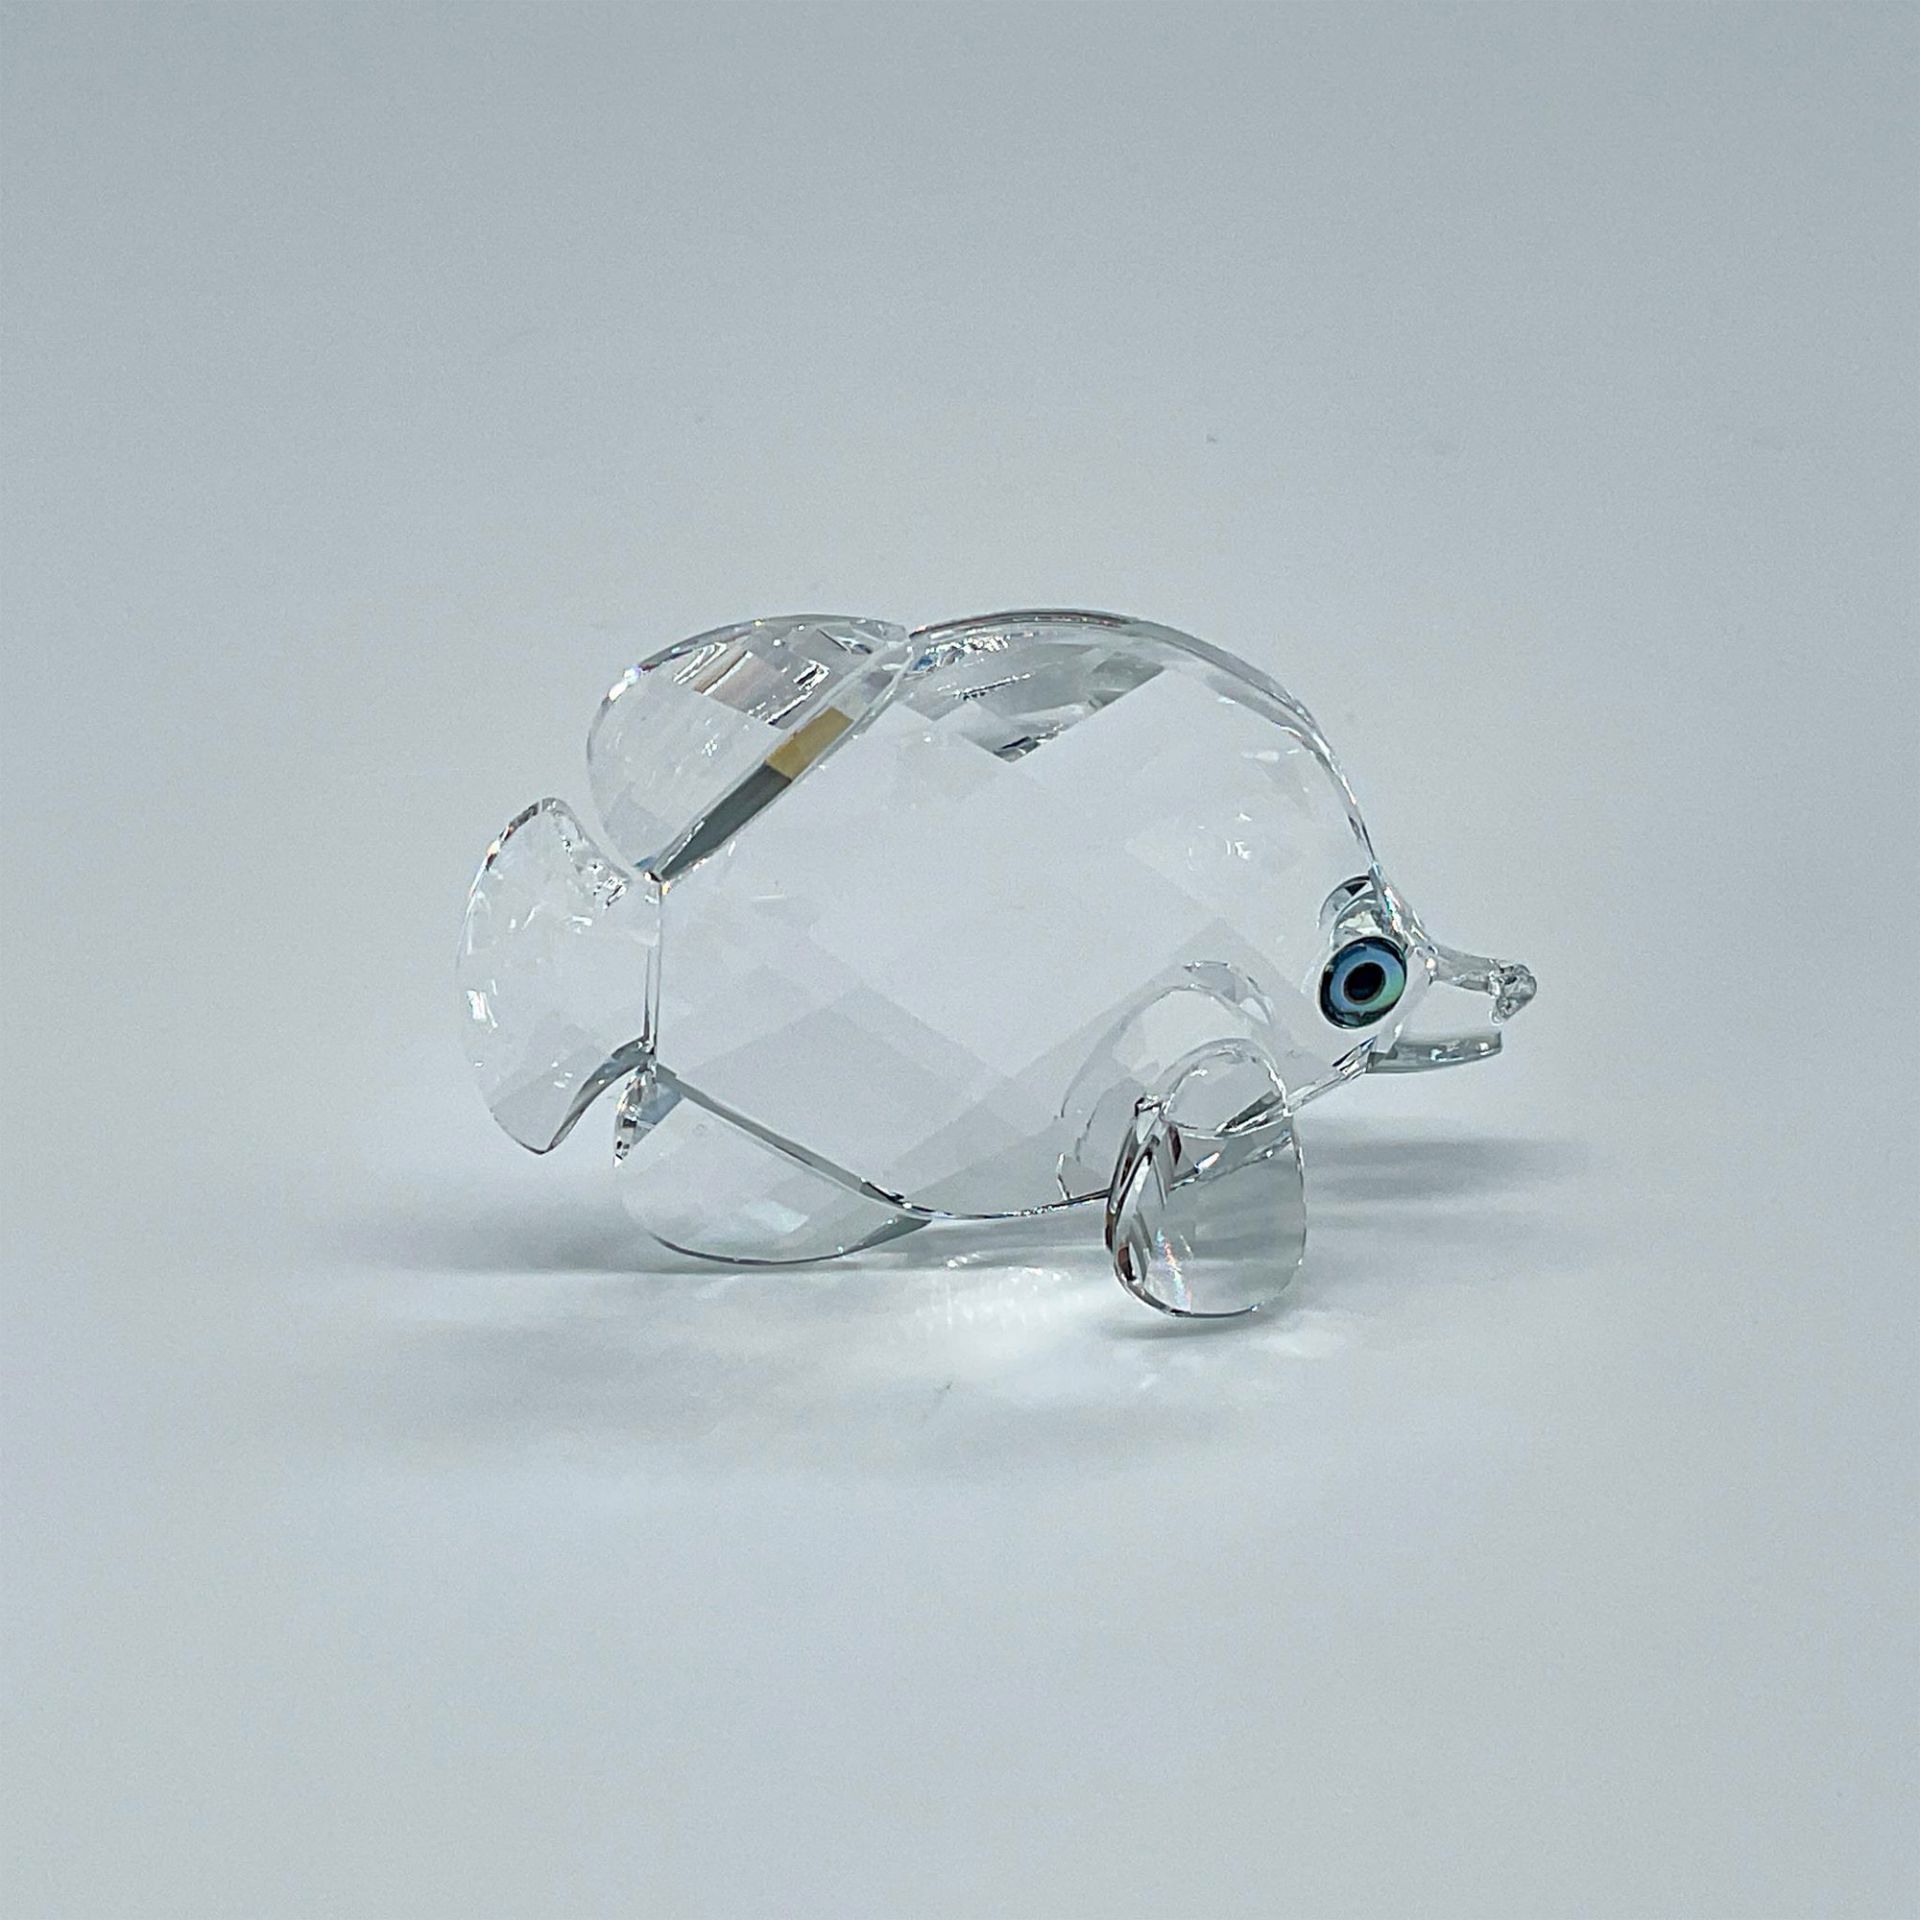 Swarovski Crystal Figurine, Small Butterfly Fish - Image 2 of 4